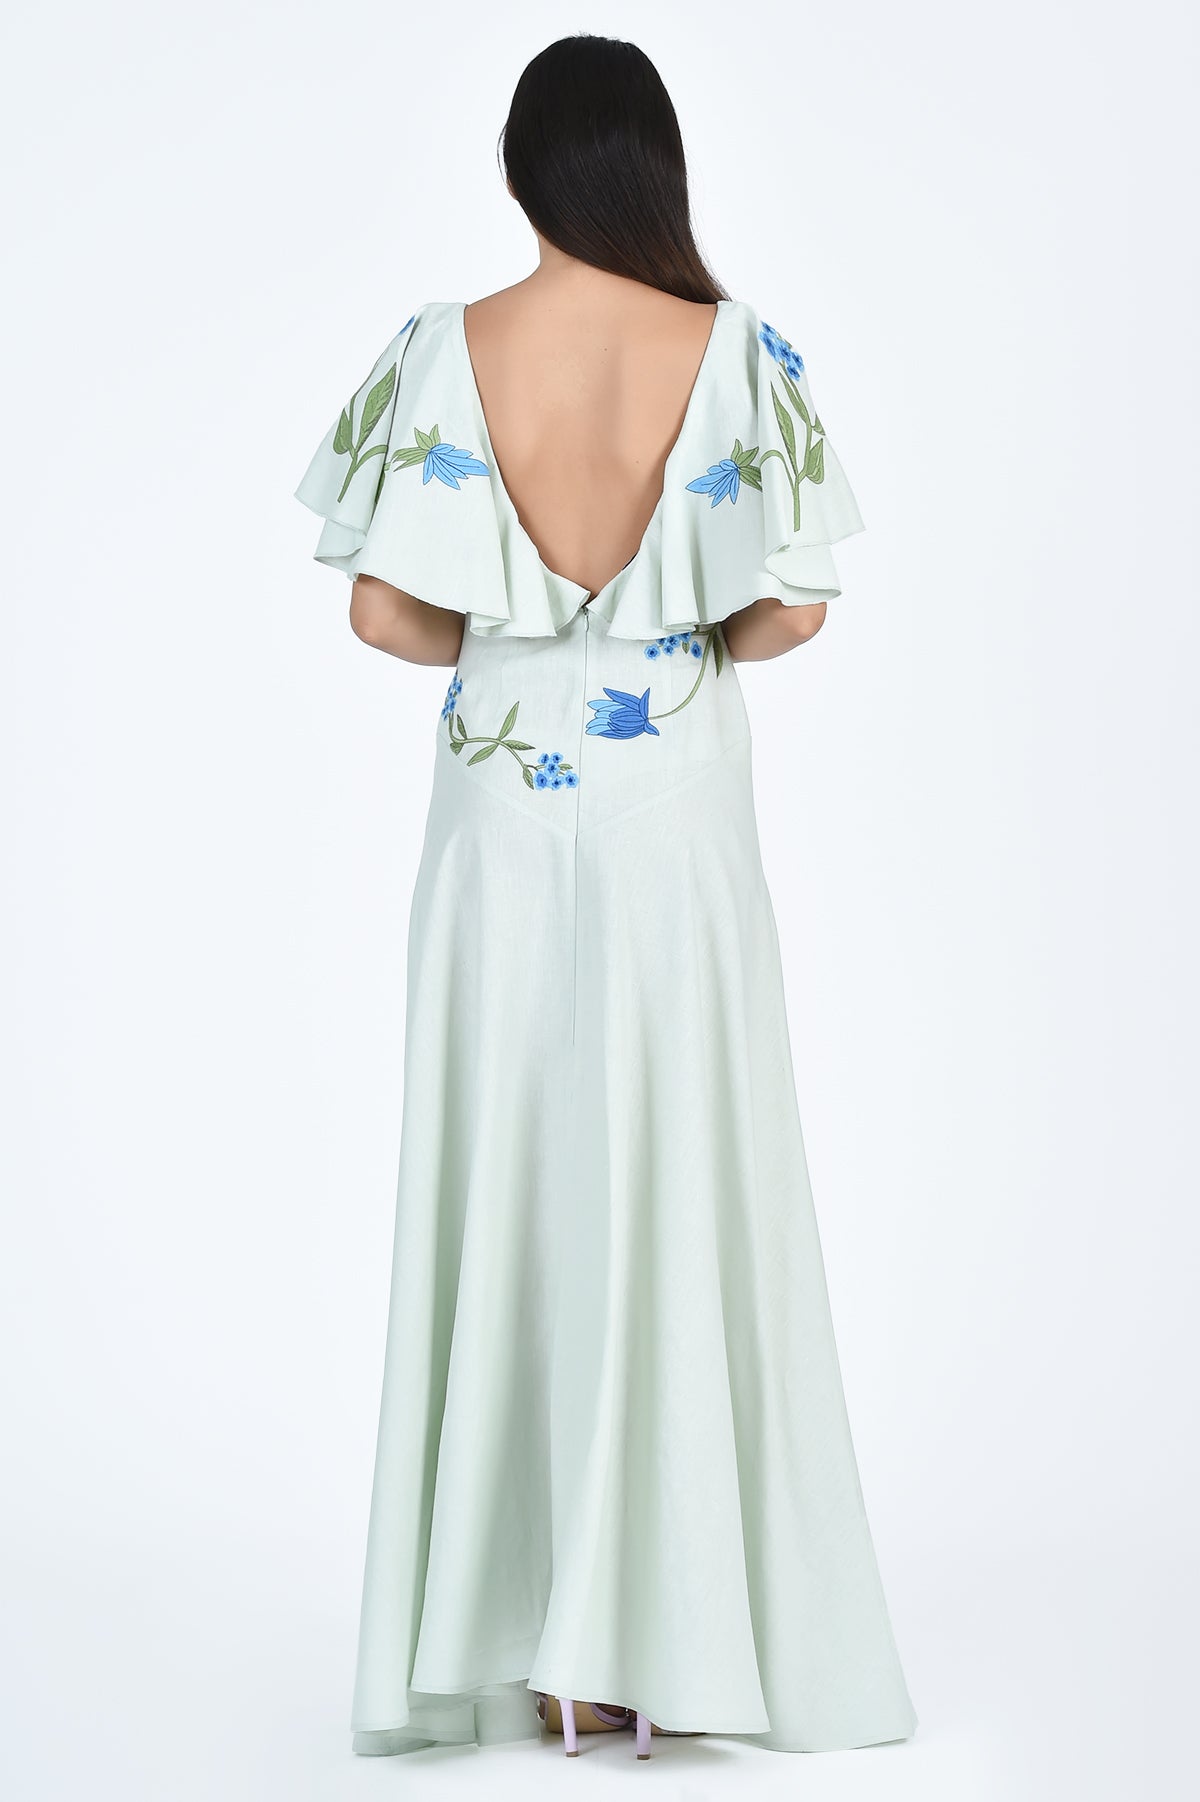 Fanm Mon Alexis Dress Open Back with Floral Embroidery in Mint (Wombman Collection)